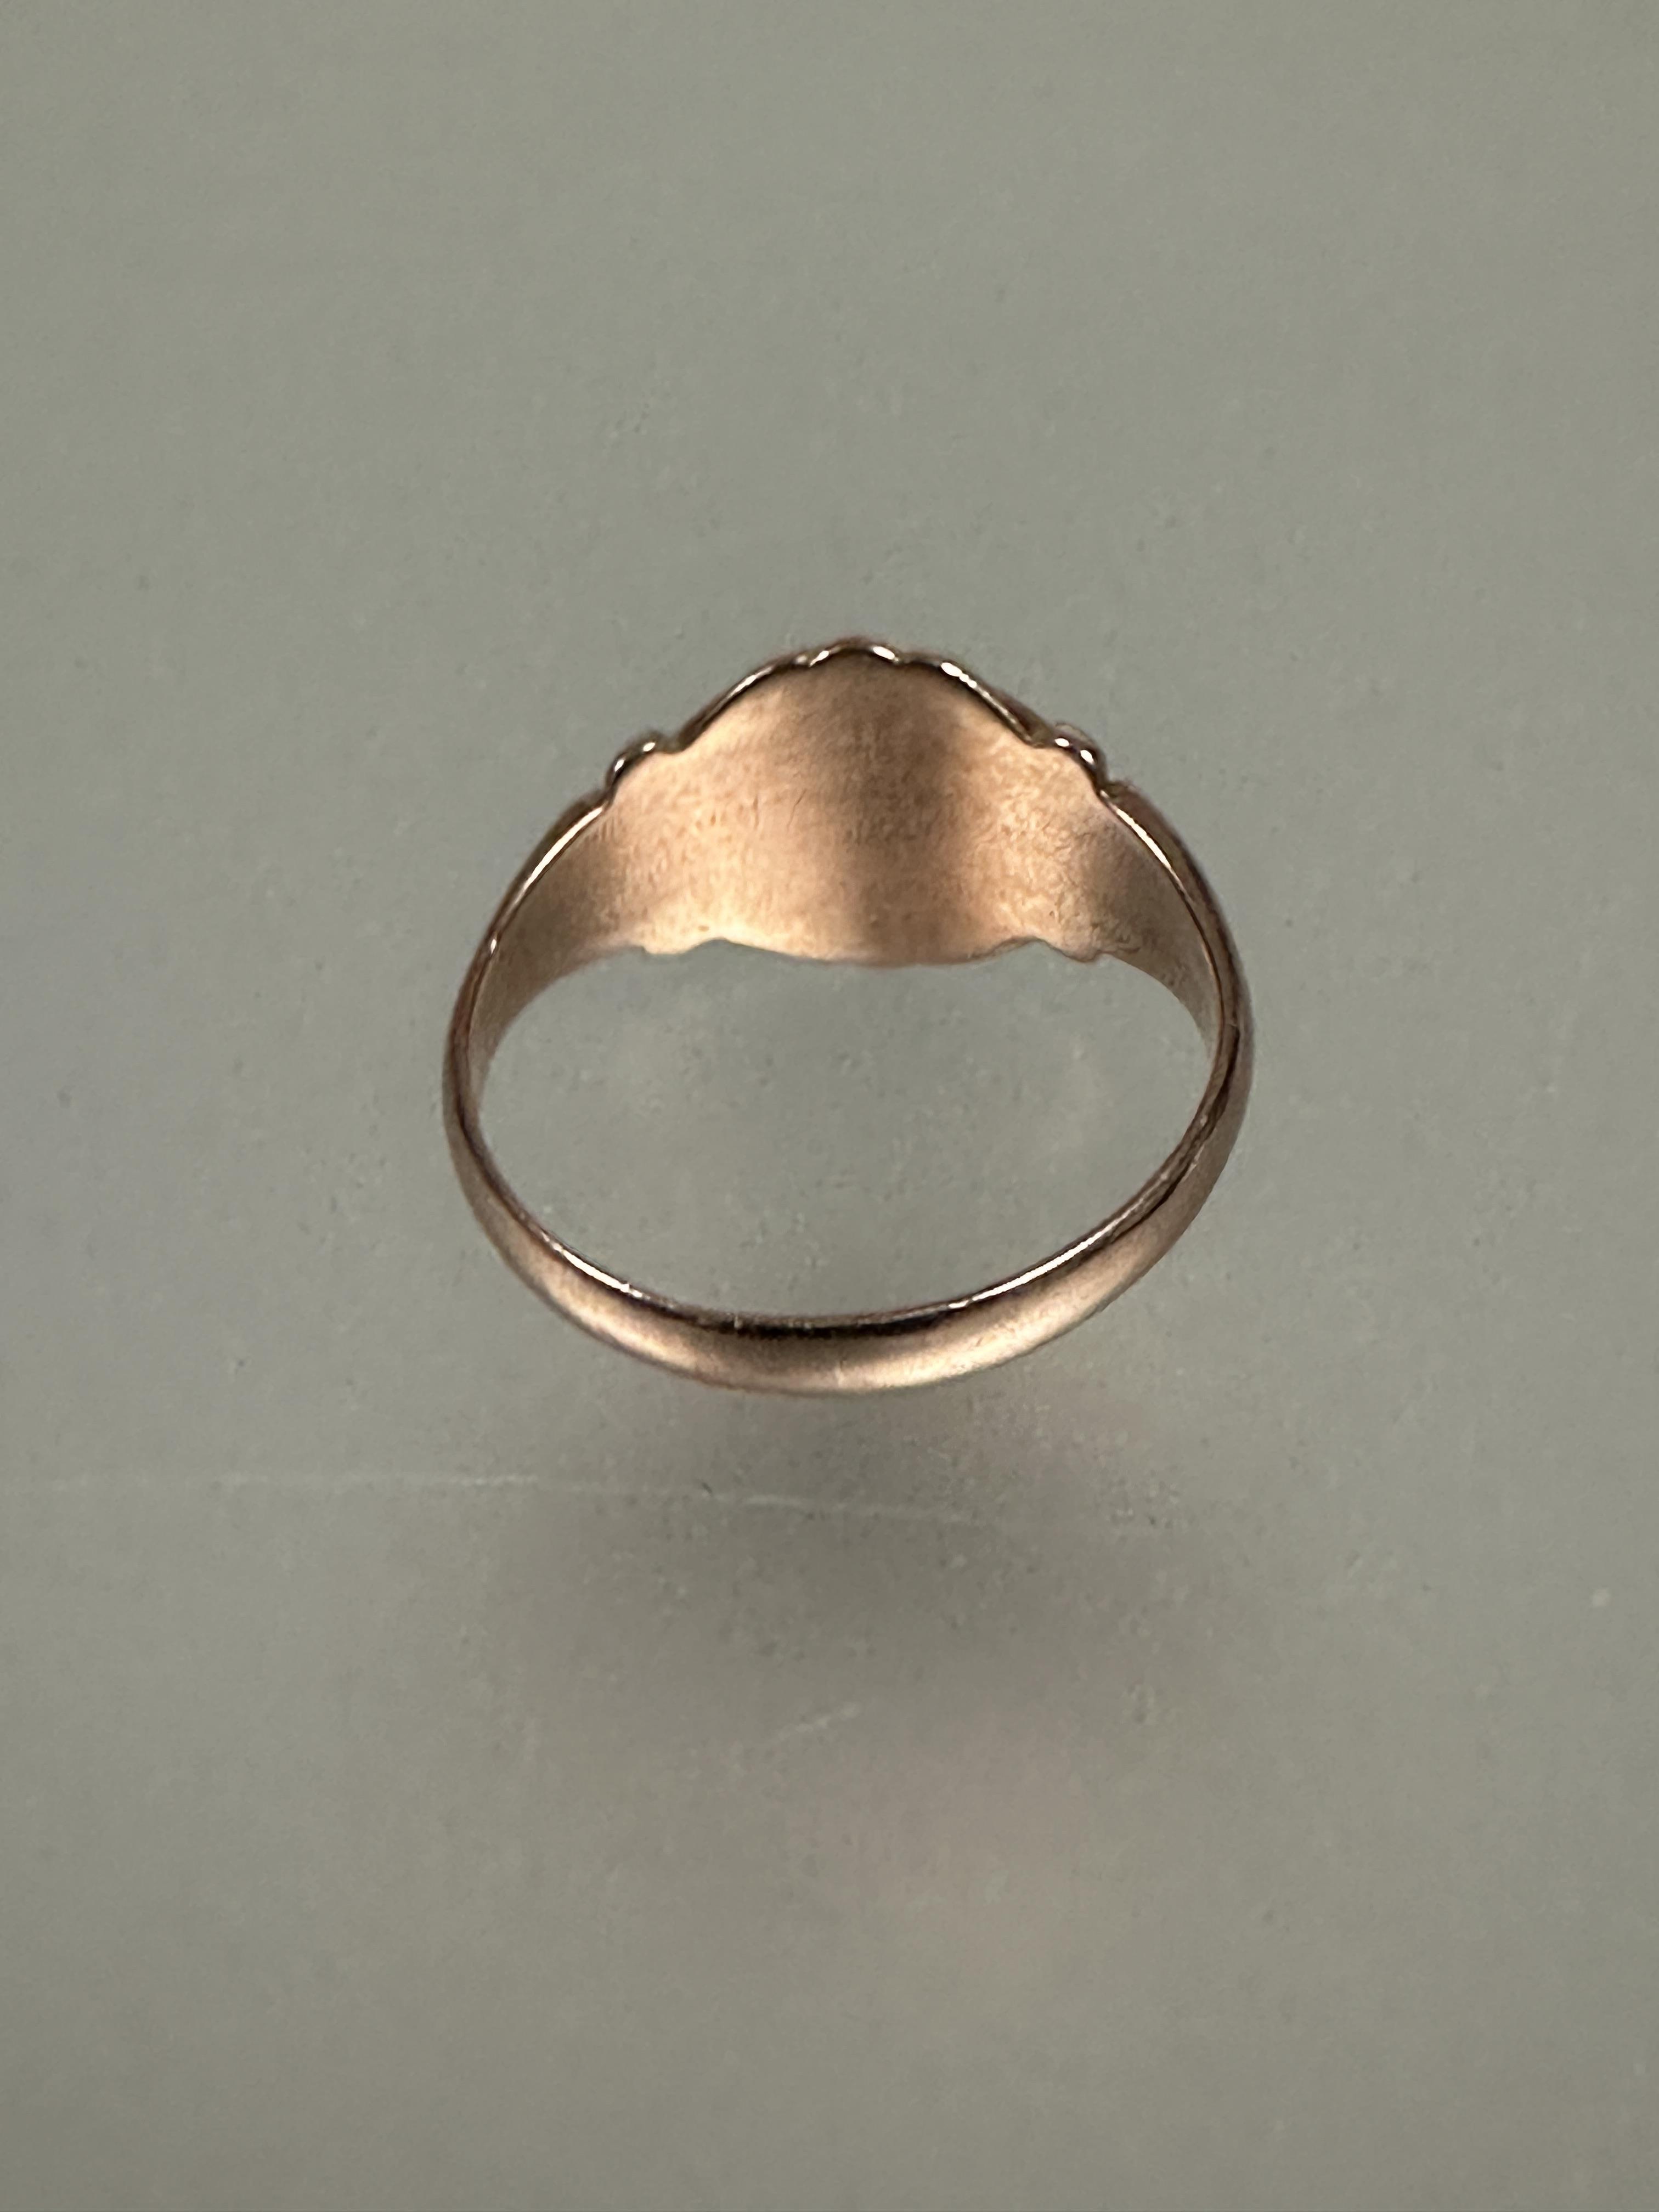 A 9ct rose gold signet ring with engraved intials TCM M 2.96g - Image 3 of 4